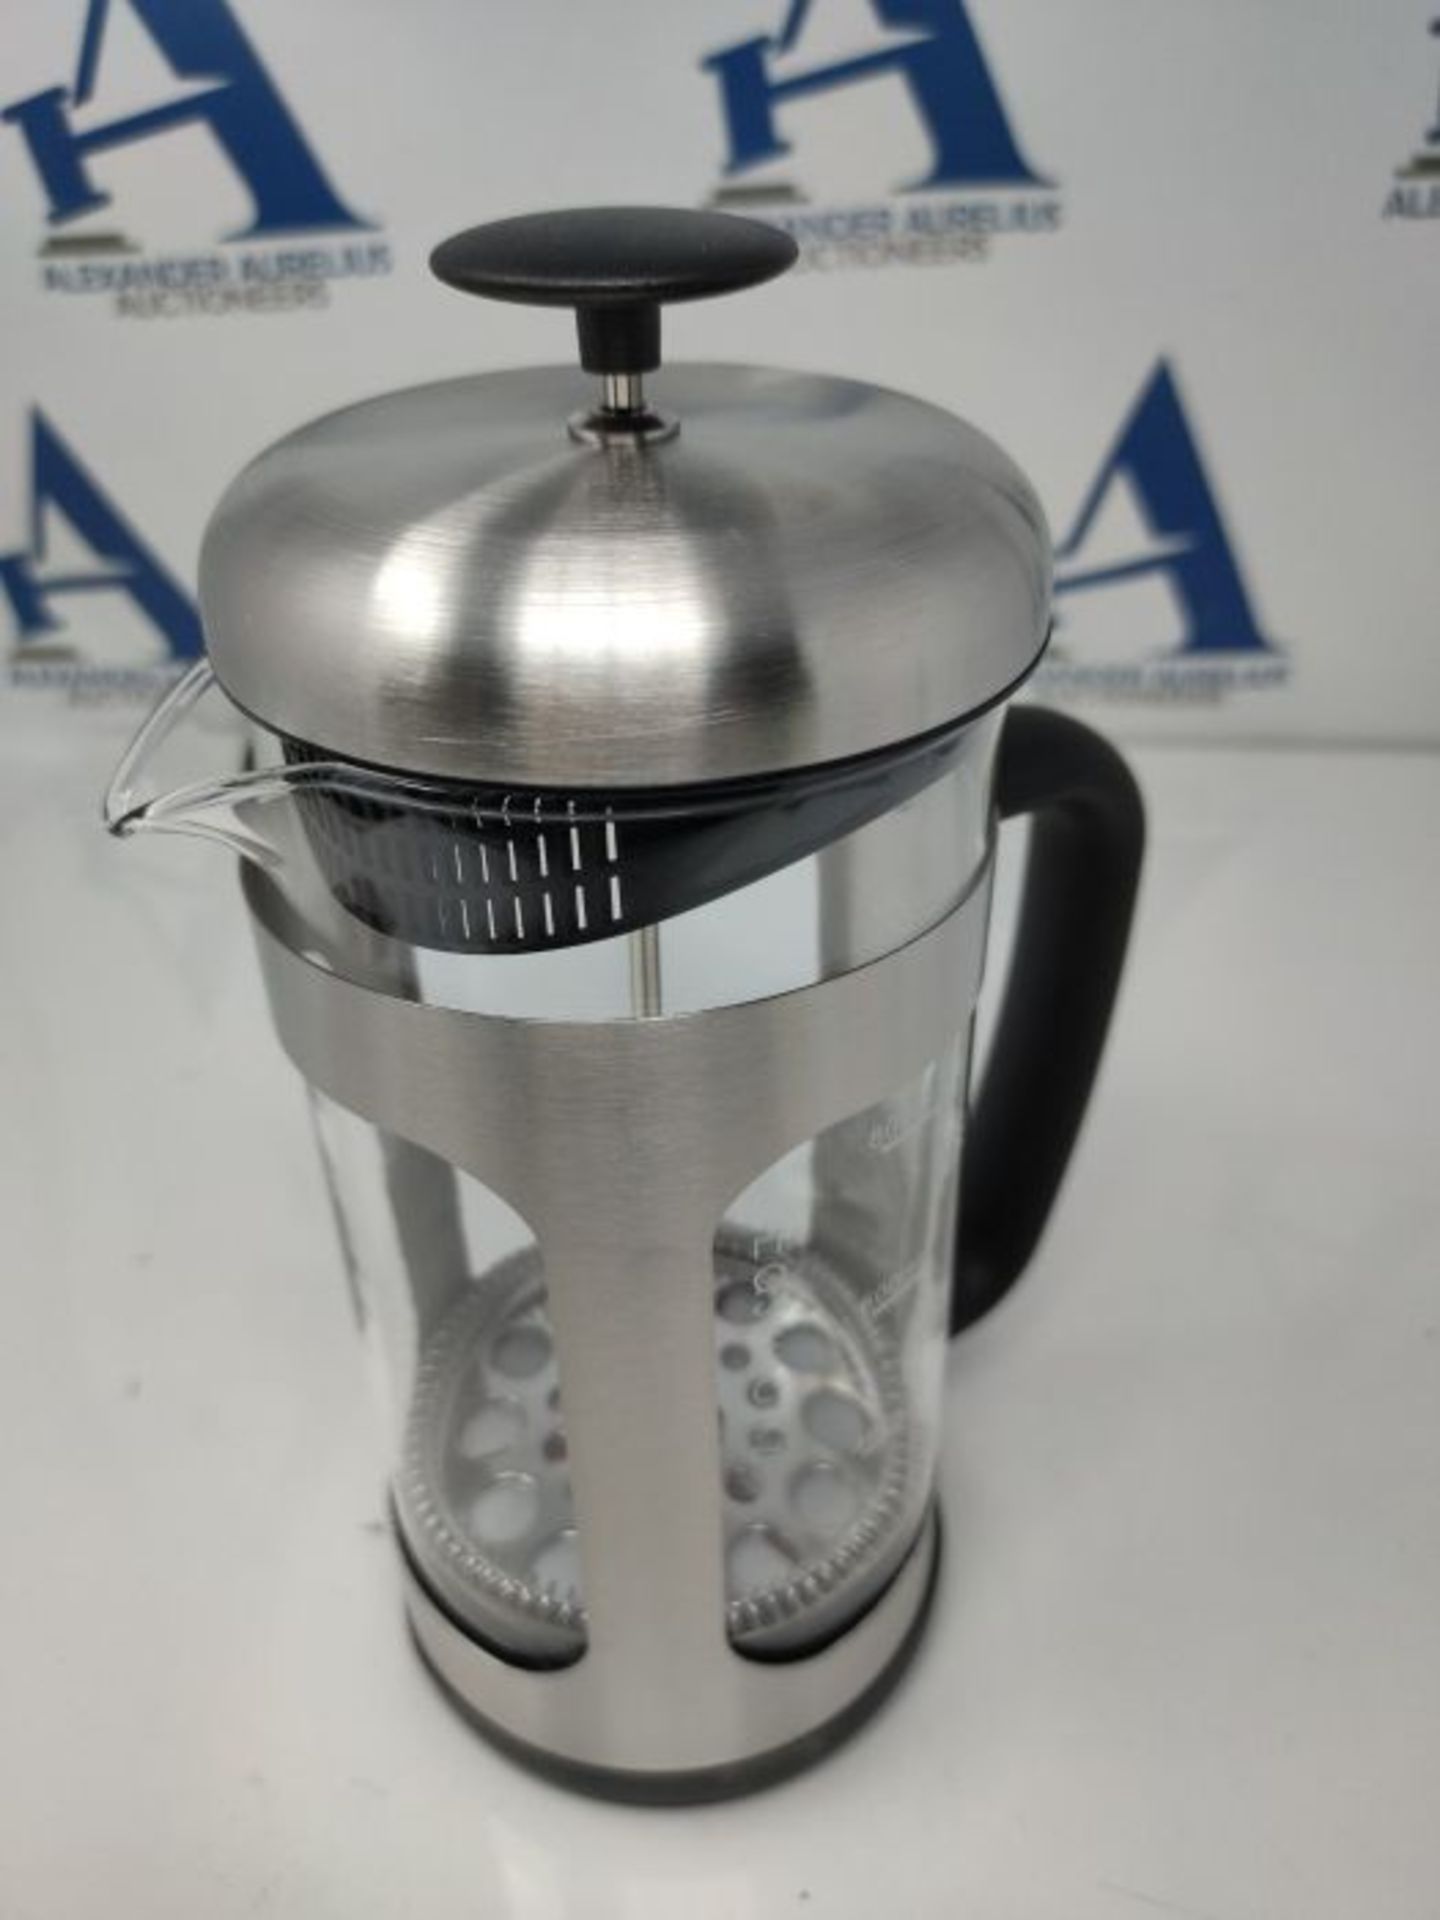 Easyworkz Stainless Steel French Press 1000ml Coffee Tea Maker with Soft Grip Handle - Image 3 of 3